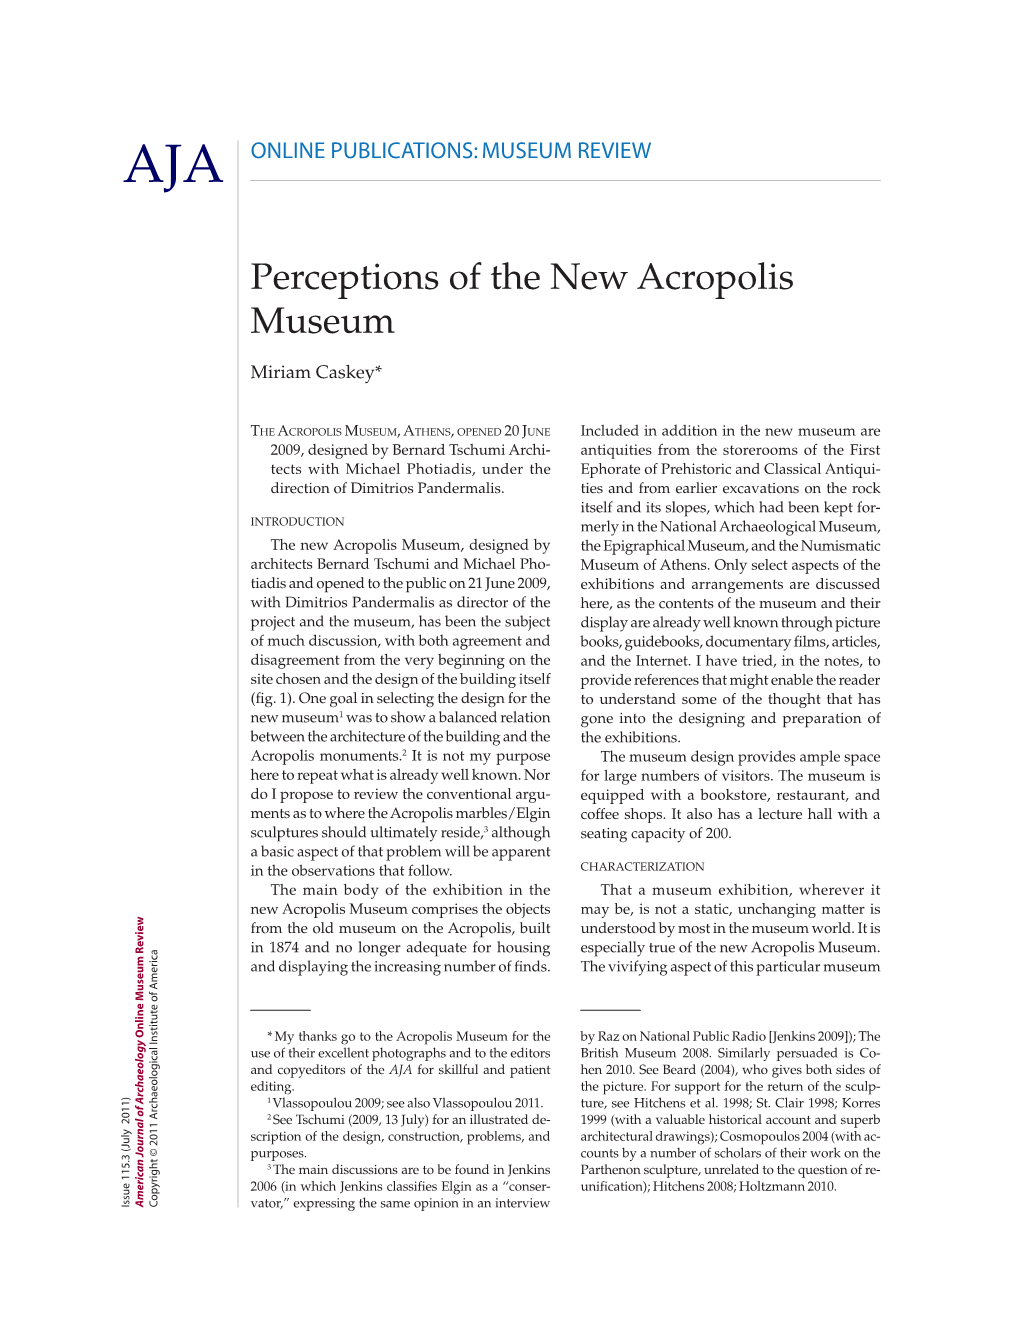 Perceptions of the New Acropolis Museum